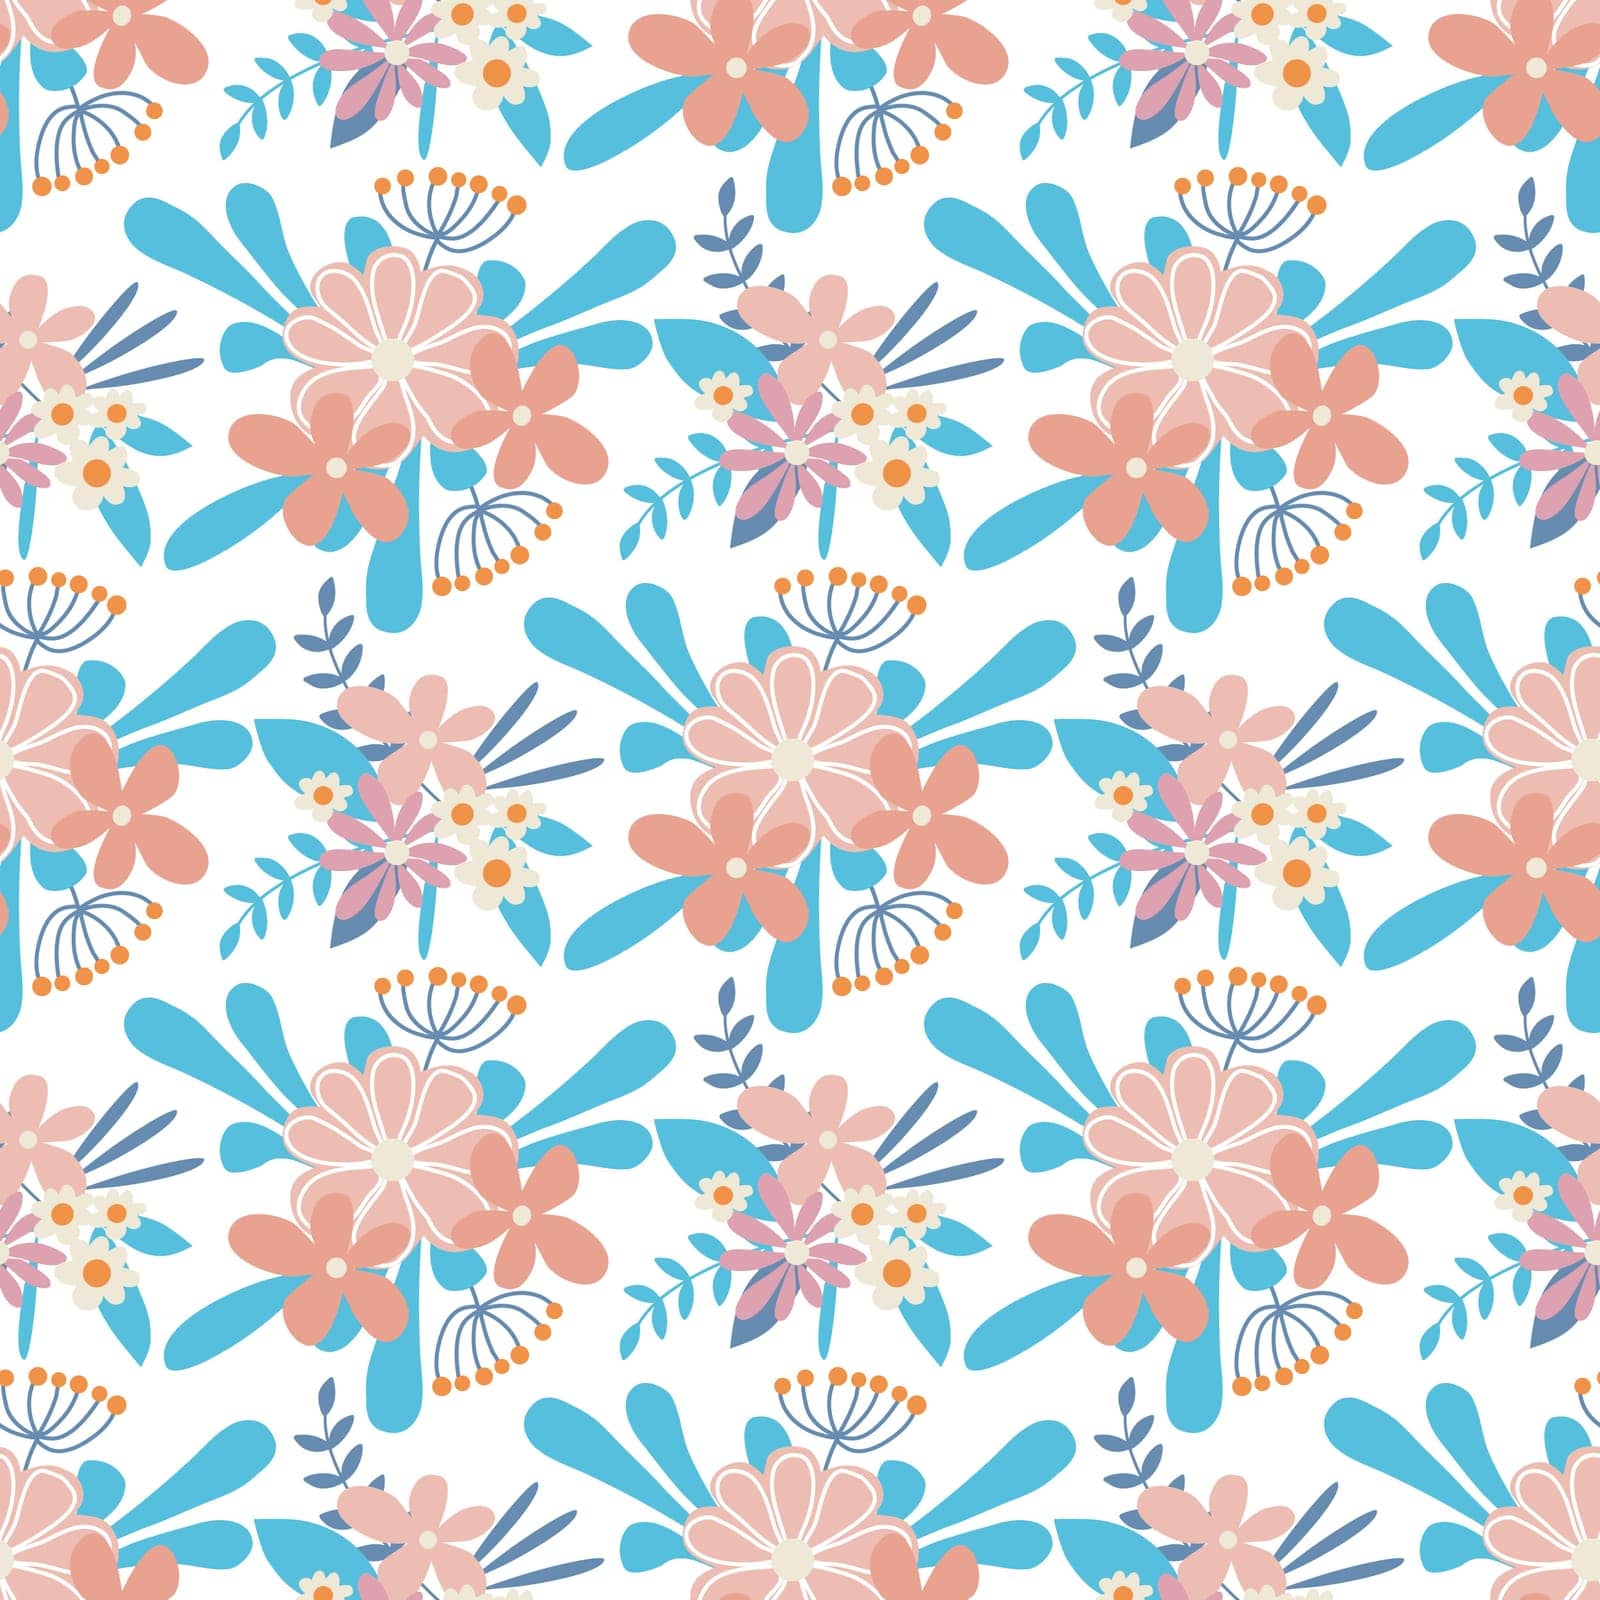 Spring rustic floral seamless pattern by TassiaK